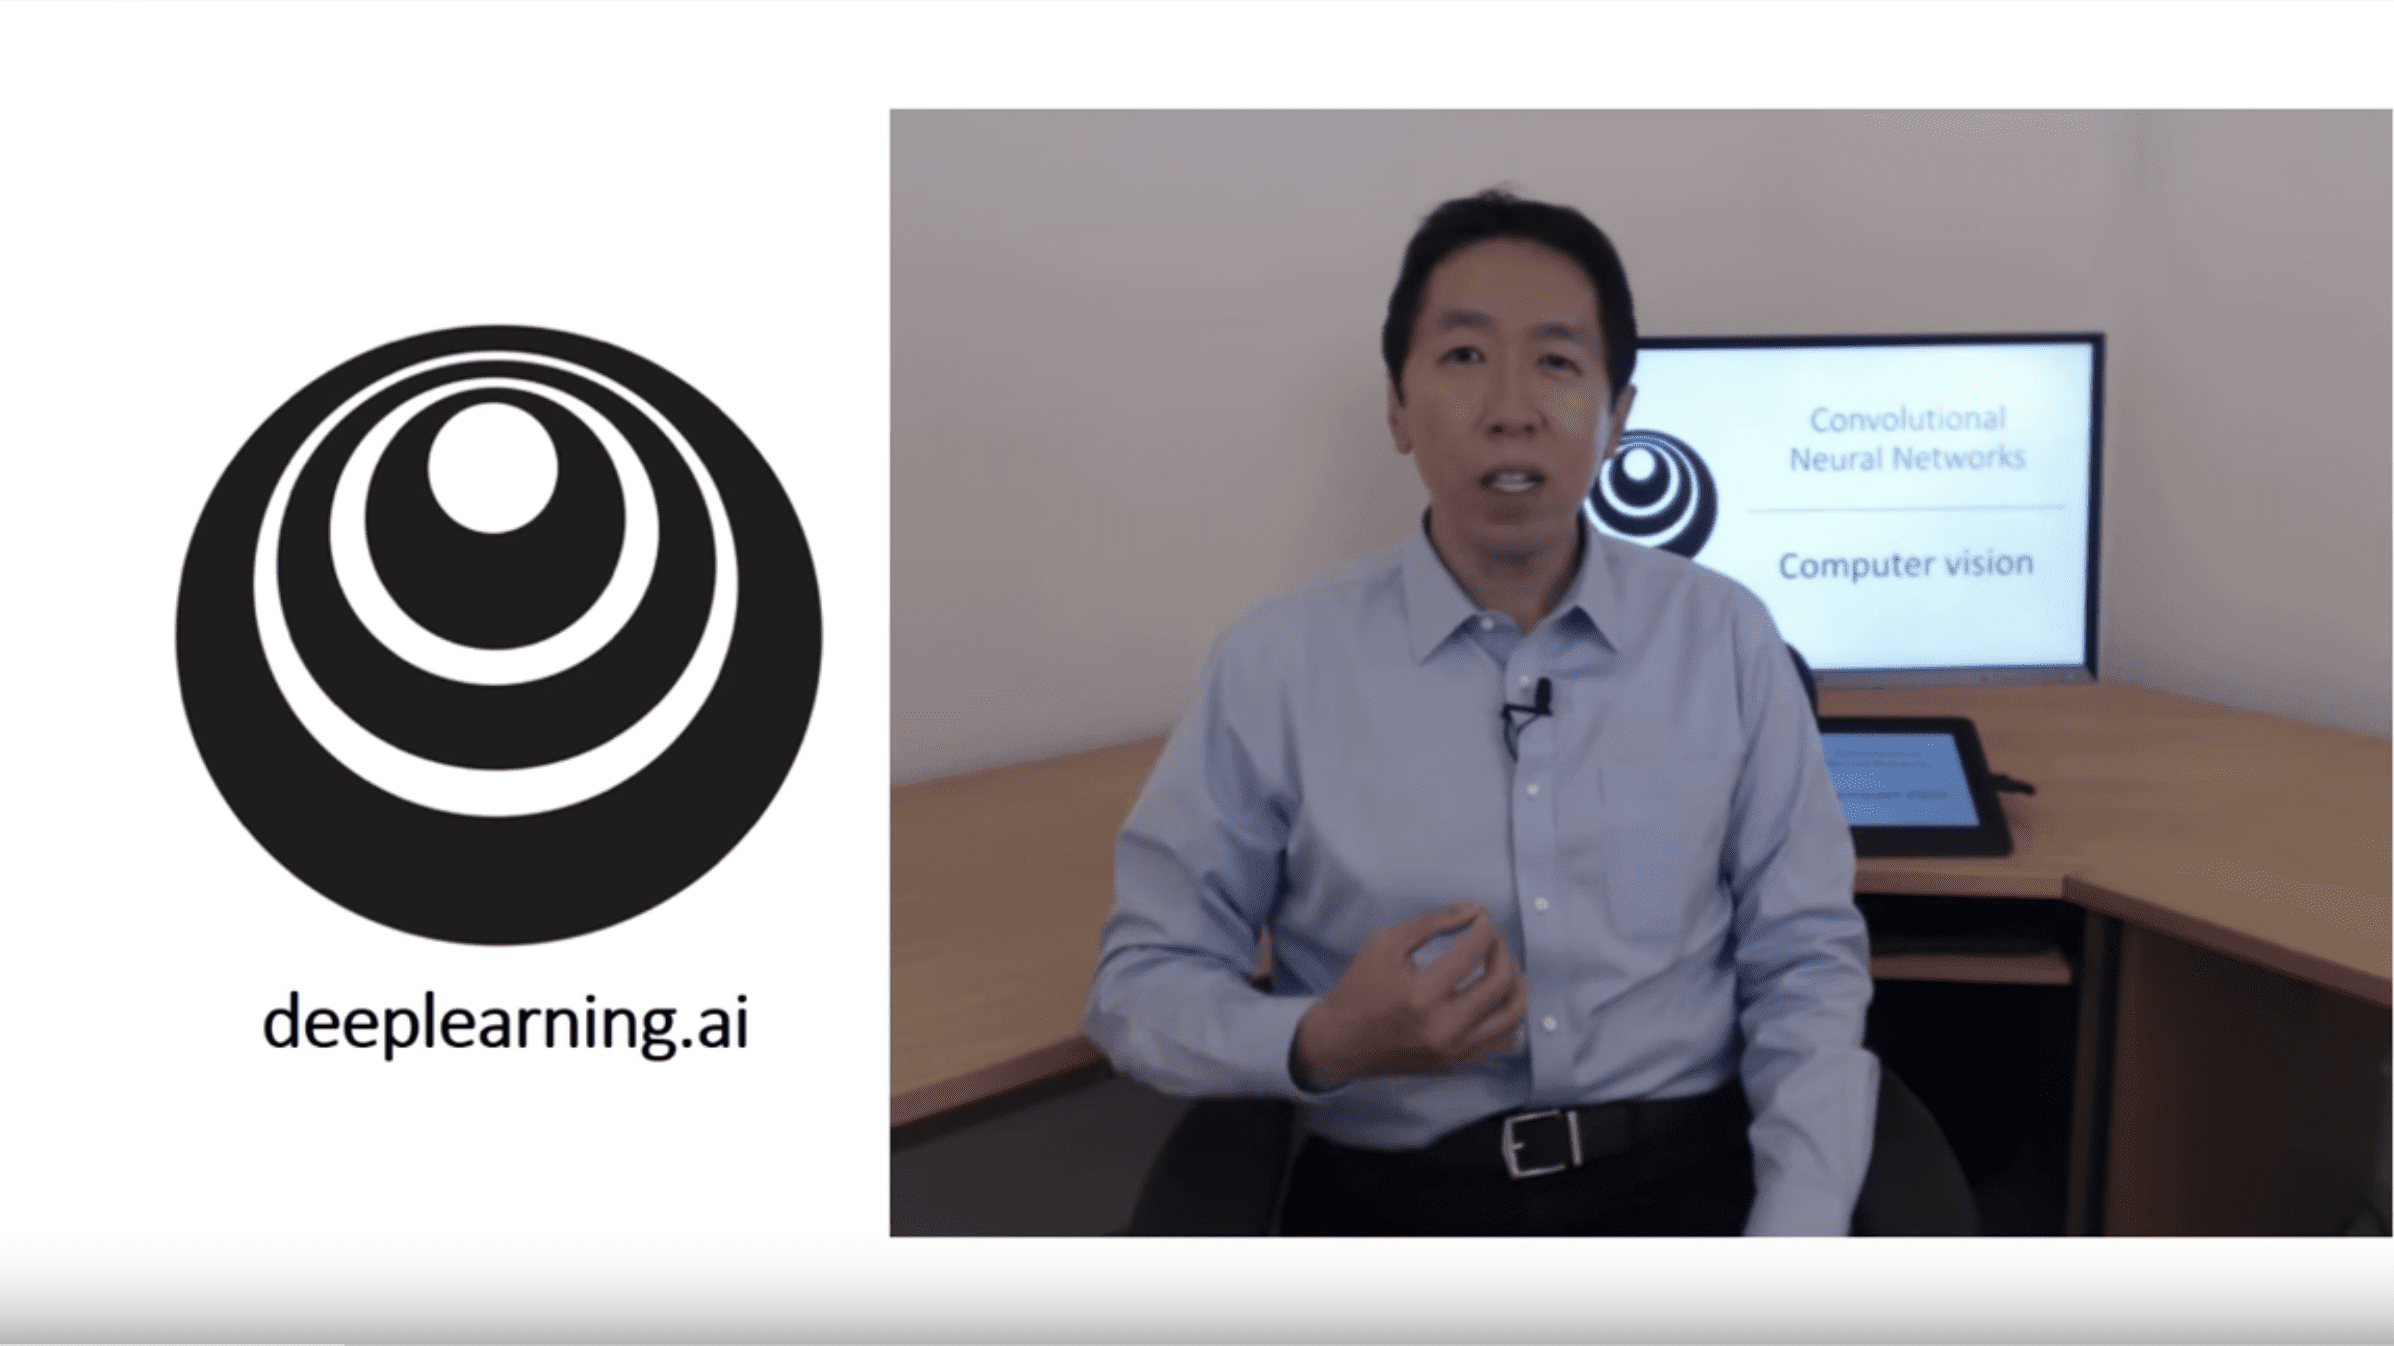 DeepLearning.AI Convolutional Neural Networks Course (Review)